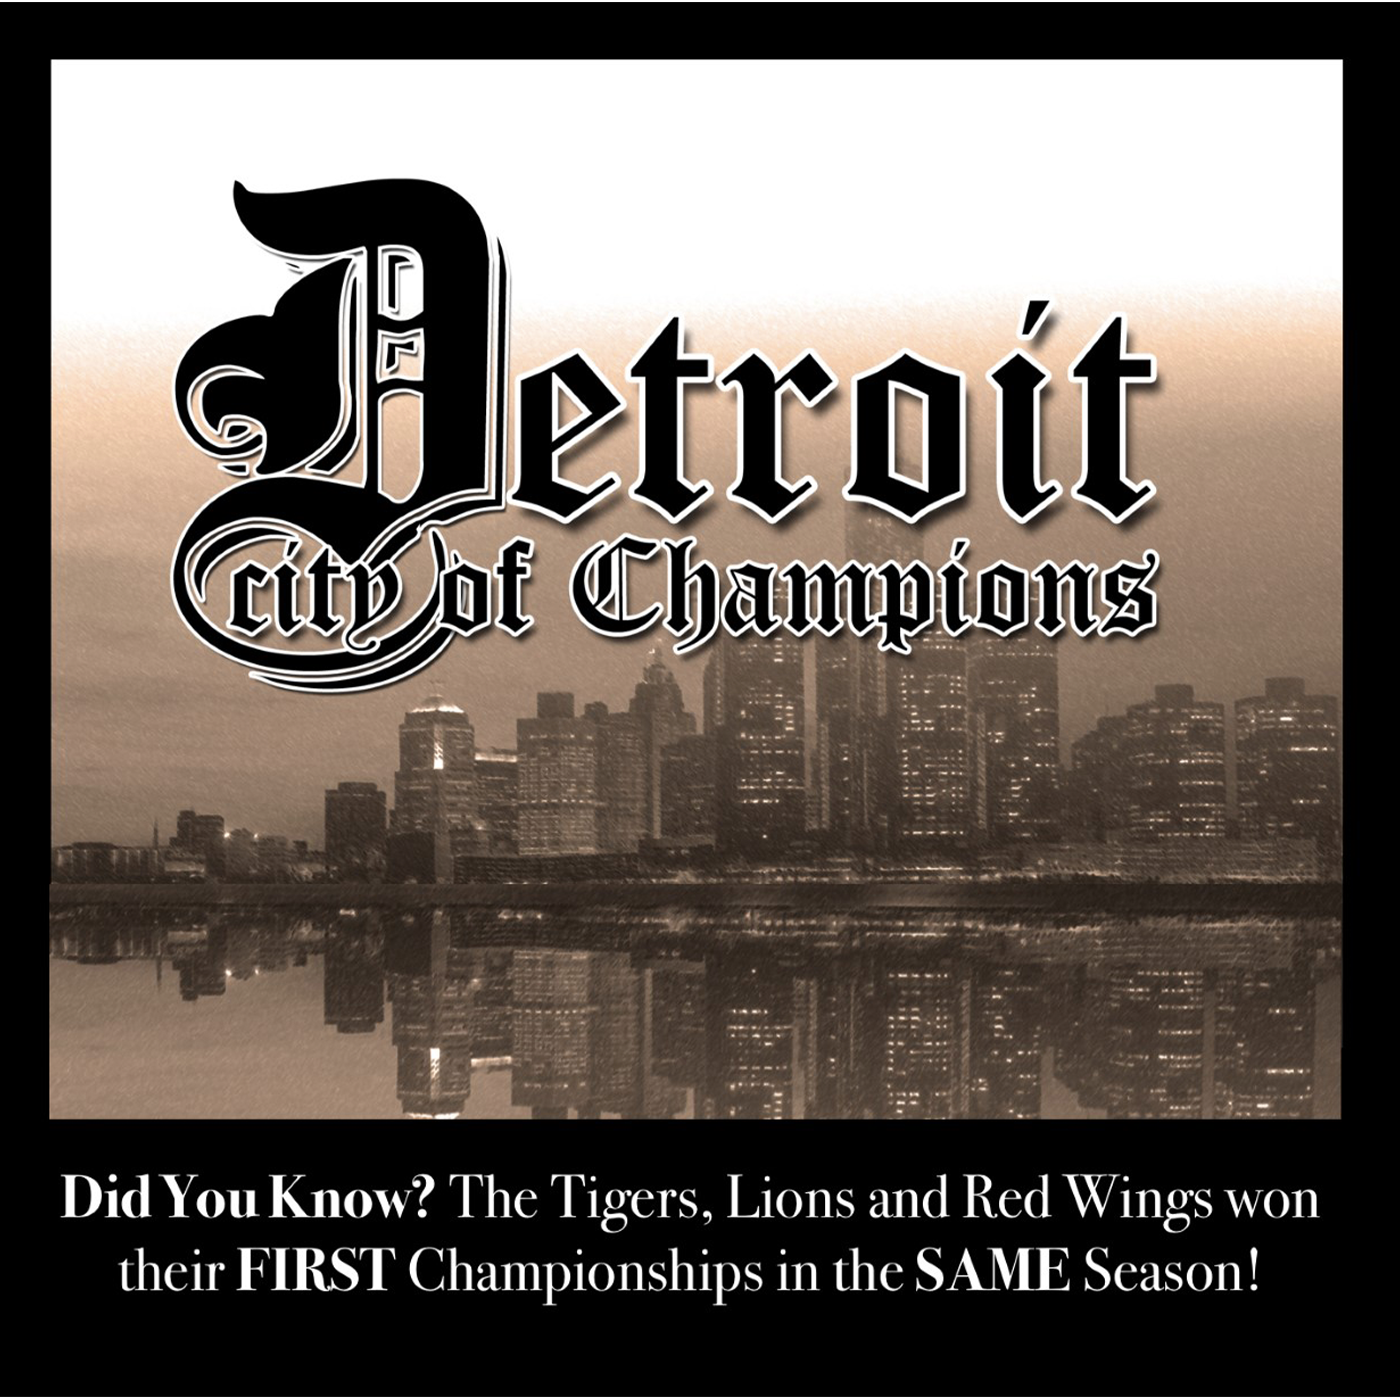 Detroit City of Champions – The Story of the 1935-36 Red Wings. Part 2: Jack Adams “Skate like the devil and fight like hell” – Episode 24